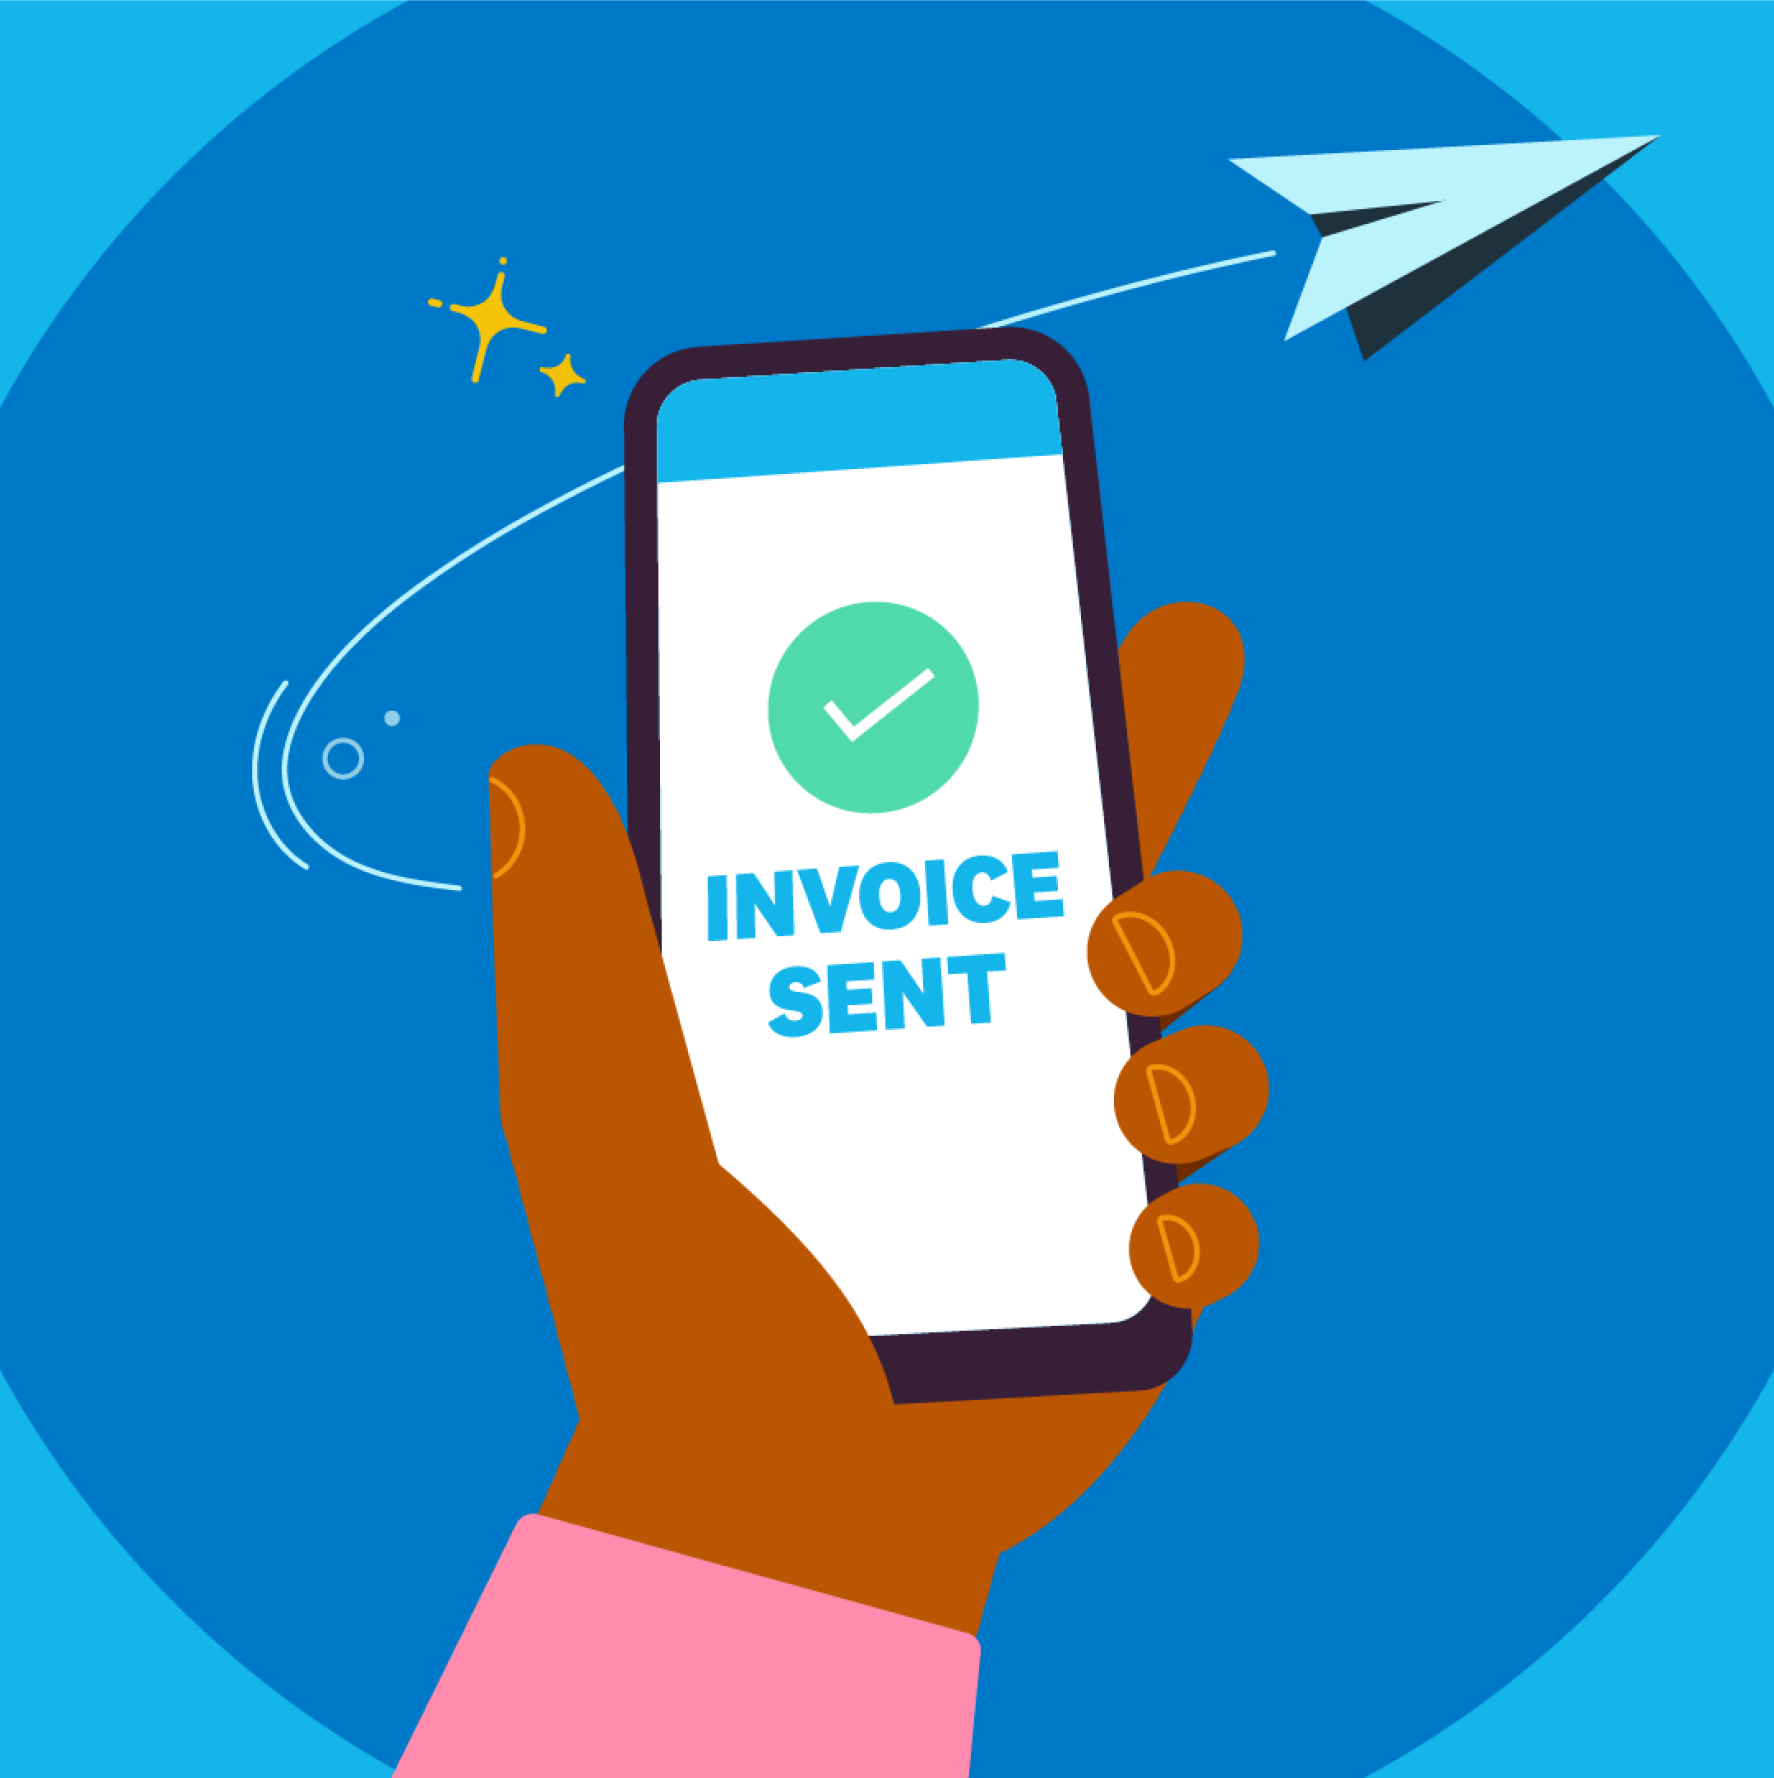 A big tick and the words ‘Invoice sent’ display on a mobile phone screen.